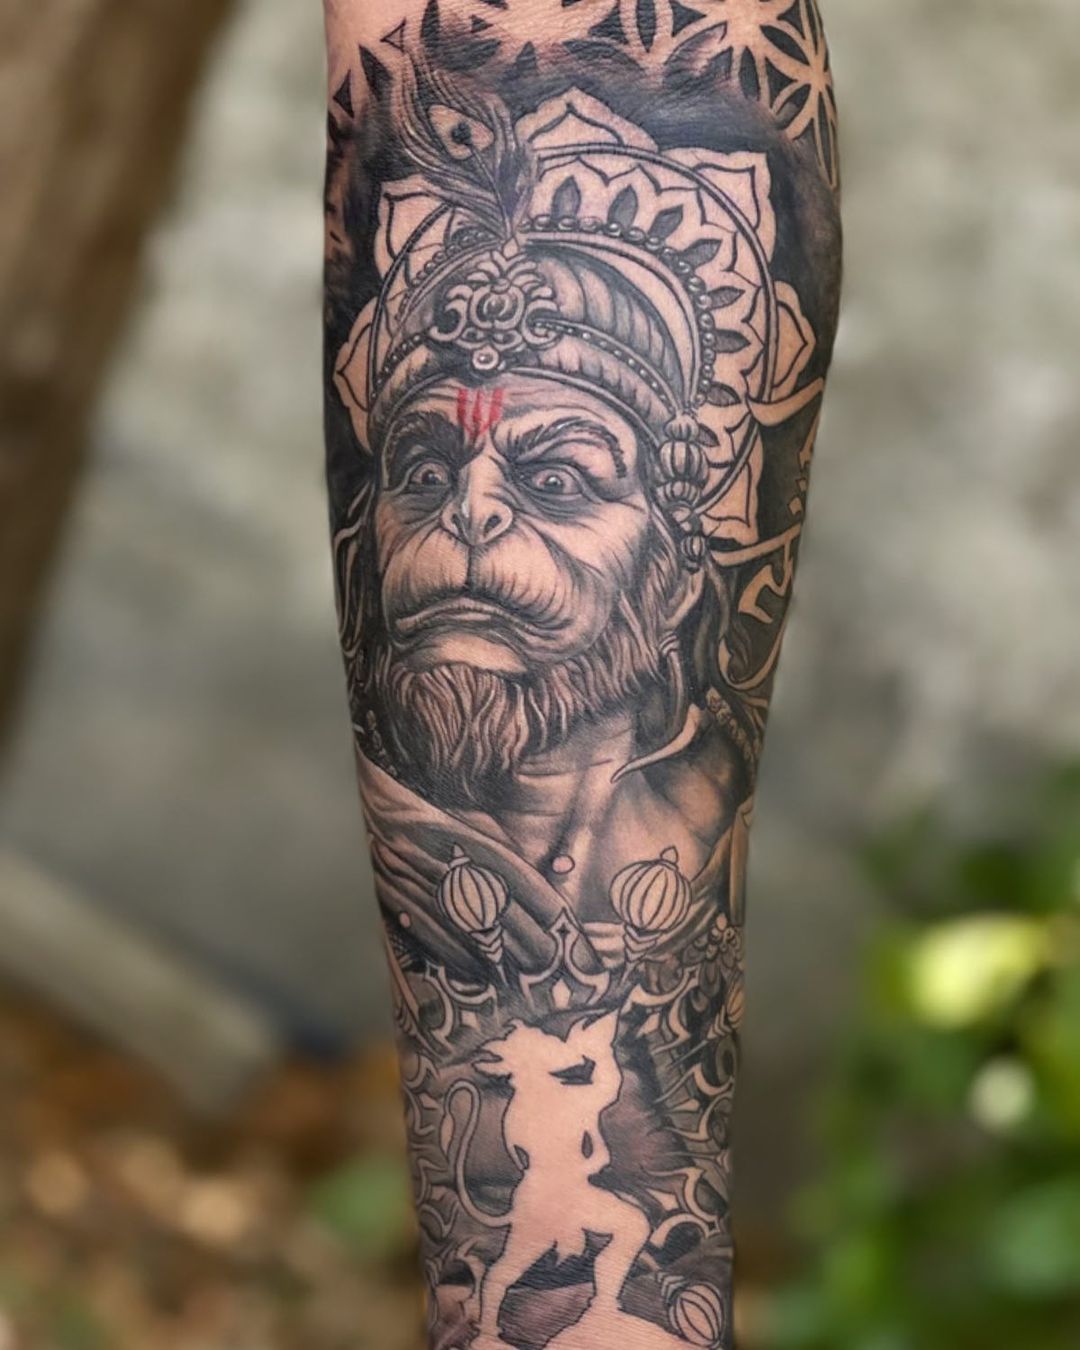 Inkparktattoo on X Lord Shiva Highly popular tattoo among the countries  The meaning of Shiva tattoo is highly individual The same is true for  placement ideas also httpstcooWMNazfmbb httpstcocuQZEYQmER  httpstco2U5j1zpioz  X